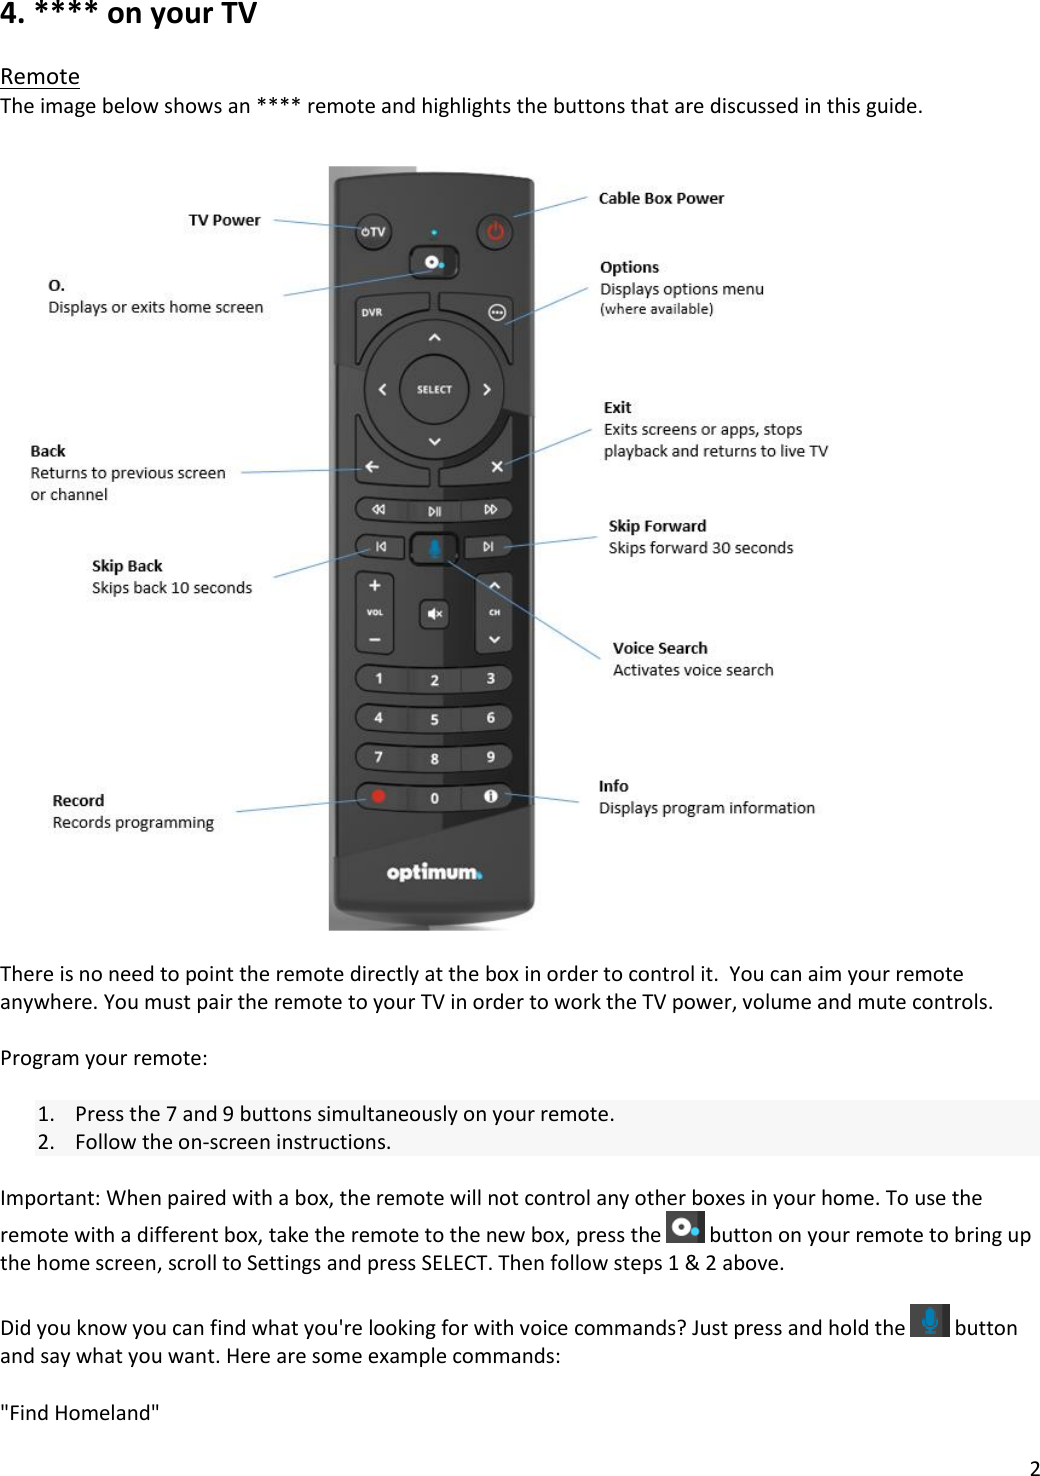 2  4. **** on your TV  Remote The image below shows an **** remote and highlights the buttons that are discussed in this guide.    There is no need to point the remote directly at the box in order to control it.  You can aim your remote anywhere. You must pair the remote to your TV in order to work the TV power, volume and mute controls.   Program your remote:  1. Press the 7 and 9 buttons simultaneously on your remote. 2. Follow the on-screen instructions.  Important: When paired with a box, the remote will not control any other boxes in your home. To use the remote with a different box, take the remote to the new box, press the   button on your remote to bring up the home screen, scroll to Settings and press SELECT. Then follow steps 1 &amp; 2 above.  Did you know you can find what you&apos;re looking for with voice commands? Just press and hold the   button and say what you want. Here are some example commands:  &quot;Find Homeland&quot; 